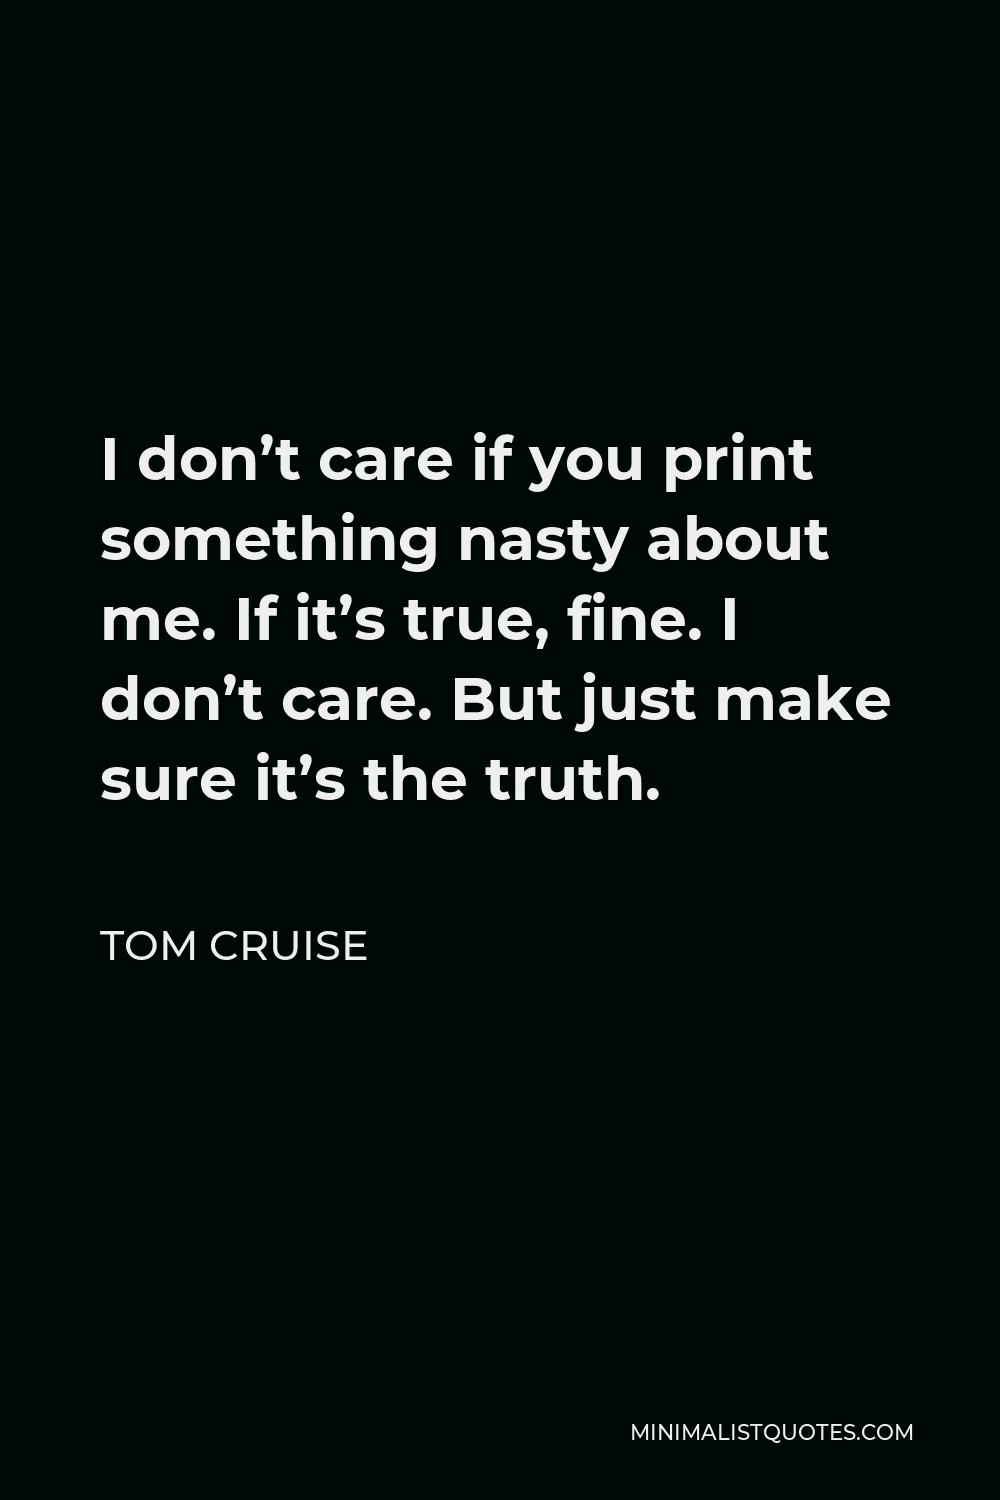 Tom Cruise Quote - I don’t care if you print something nasty about me. If it’s true, fine. I don’t care. But just make sure it’s the truth.